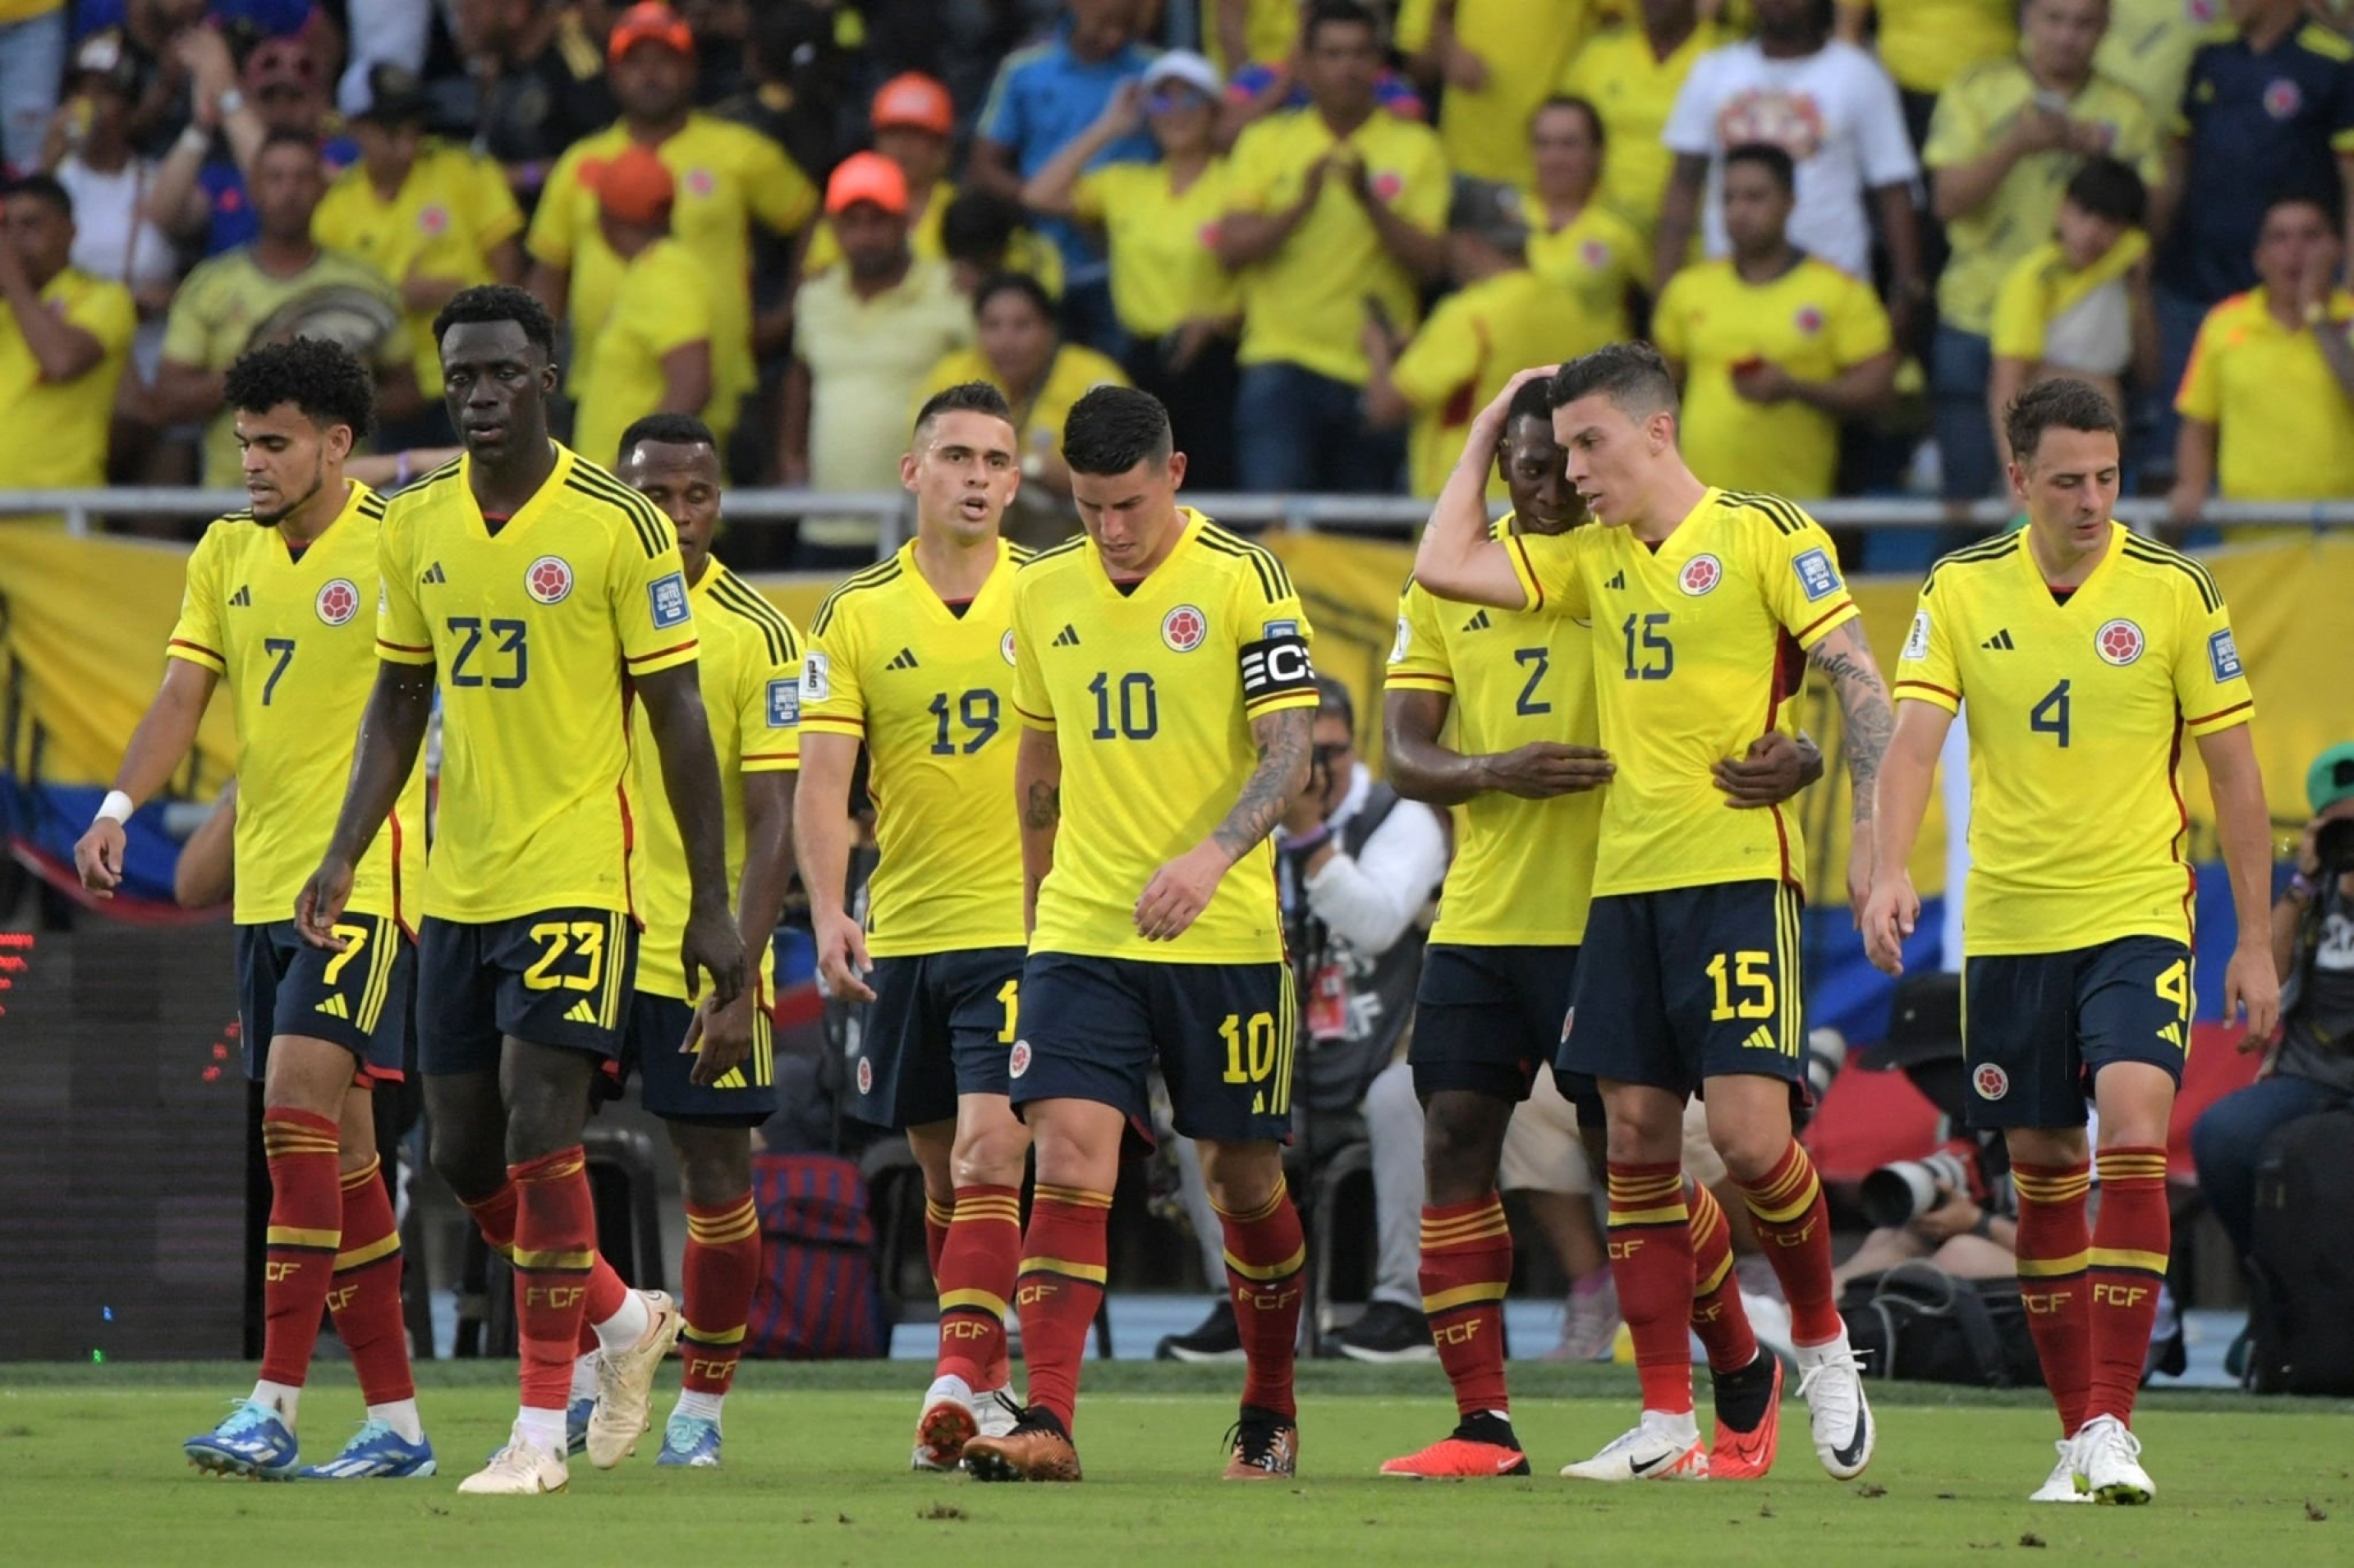 Brazil vs Colombia - BRA vs COL - Selecao will look to get back to winning ways after a 2-match winless run in the World Cup qualifers games